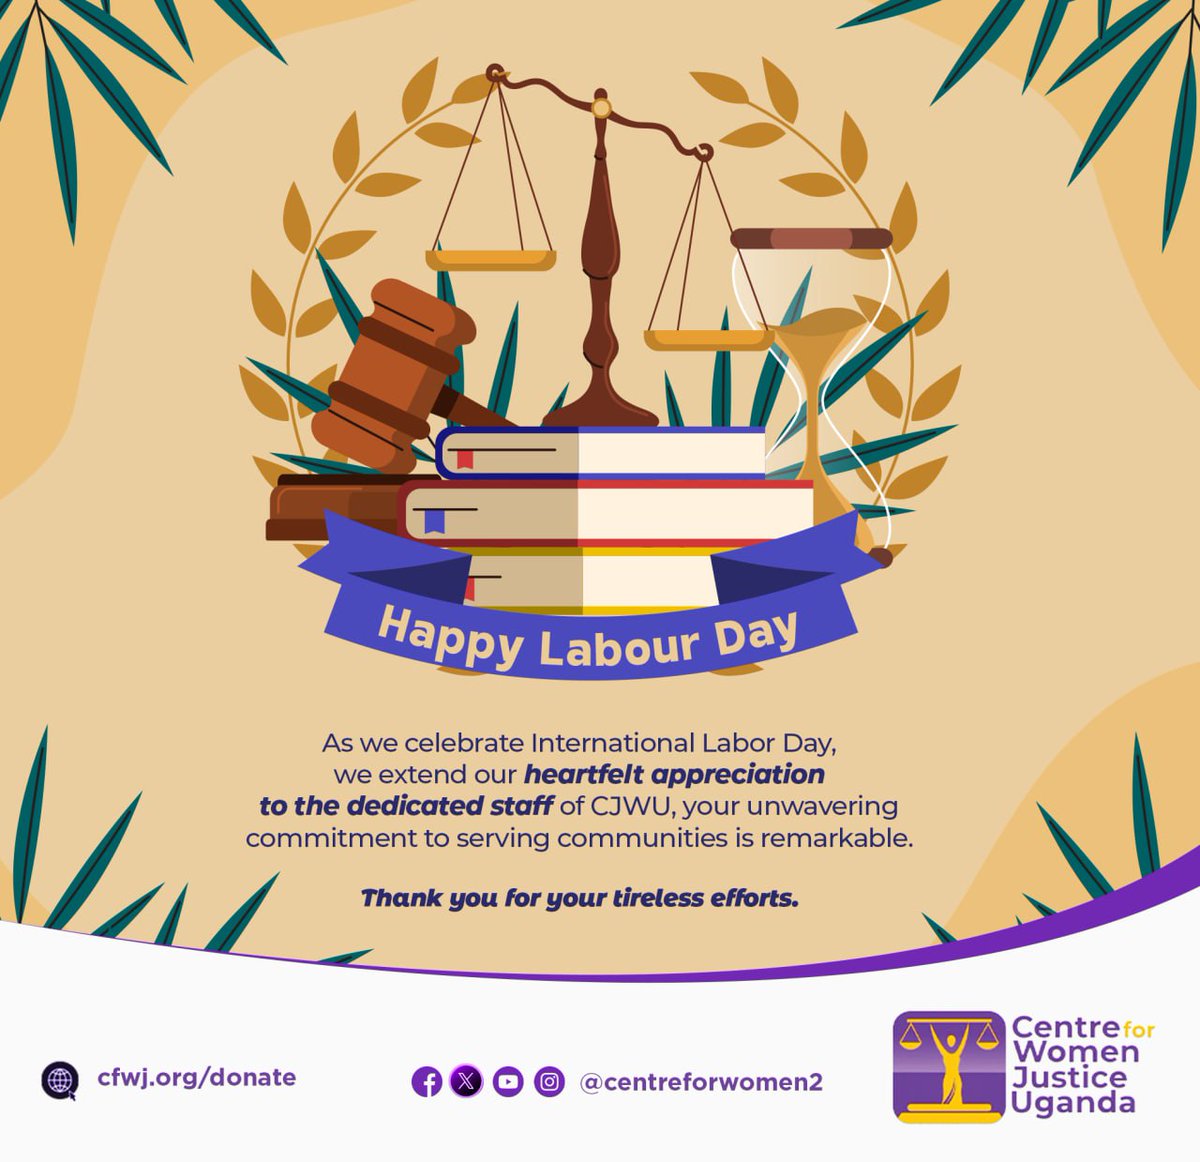 As we celebrate International Labour Day, we extend our heartfelt appreciation to the dedicated staff of CJWU, your unwavering commitment to serving communities is remarkable. Thank you for your tireless efforts. #LaborDay #CentreforWomenJusticeUganda